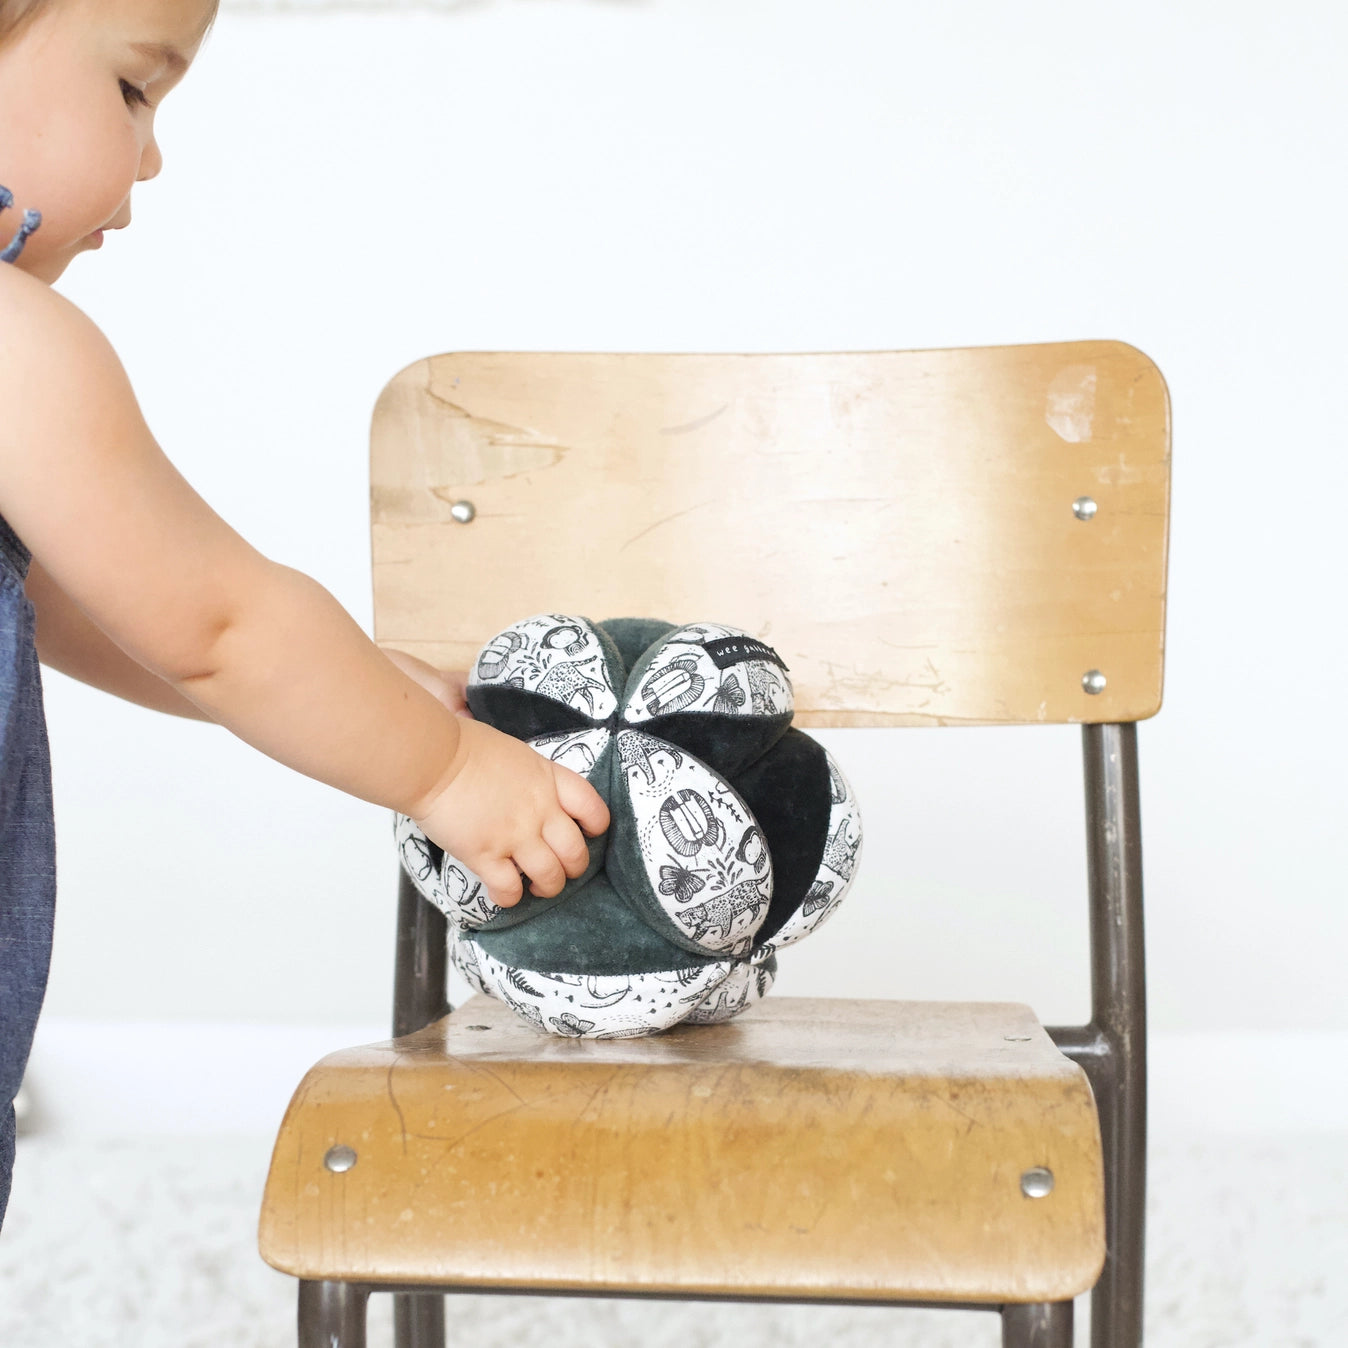 baby placing a clutch ball on a chair